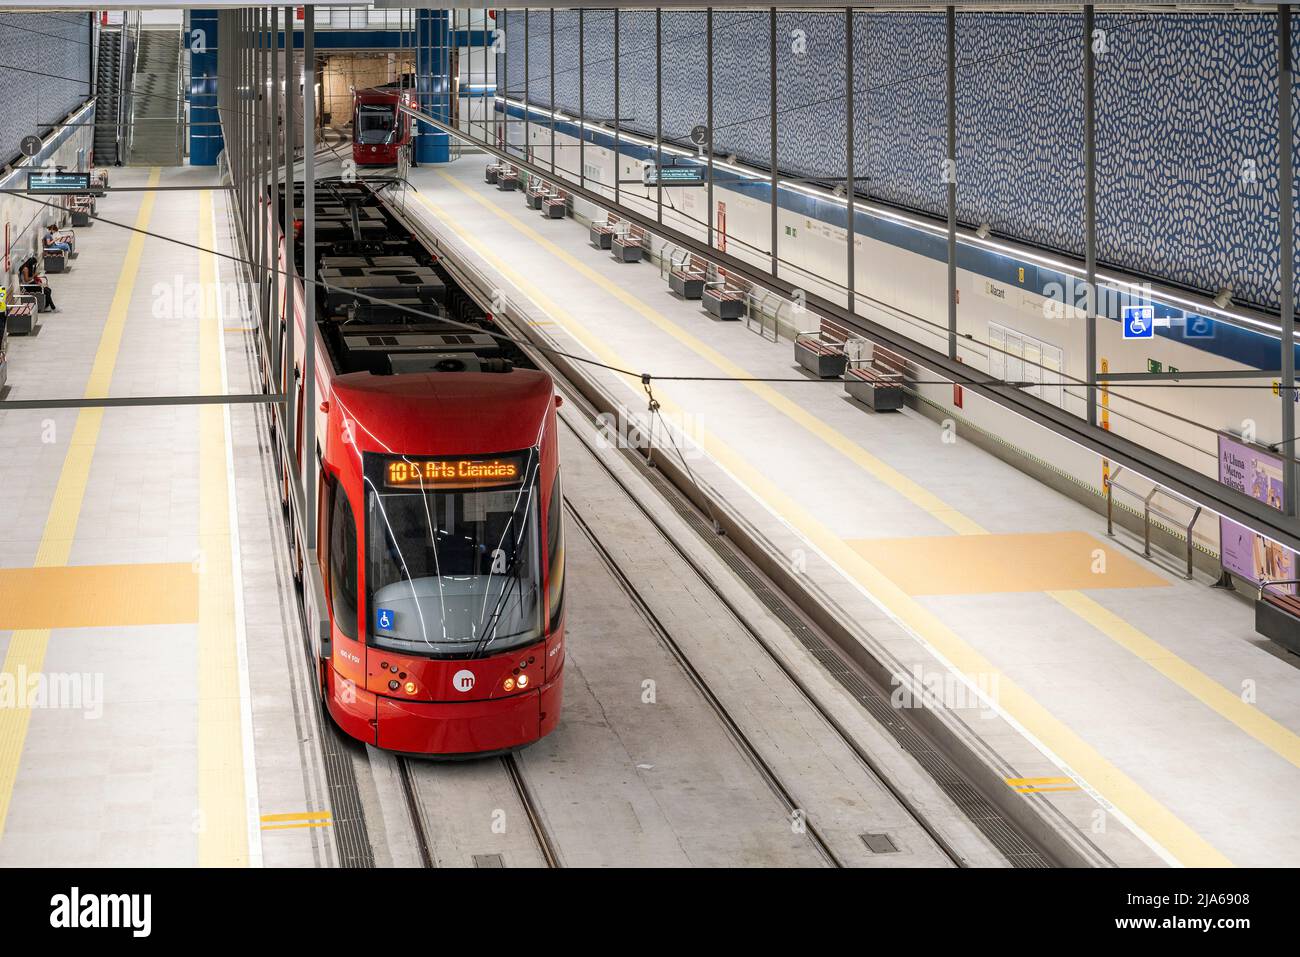 Tram of Line 10 light railway at Alacant station, Valencia, Spain Stock Photo